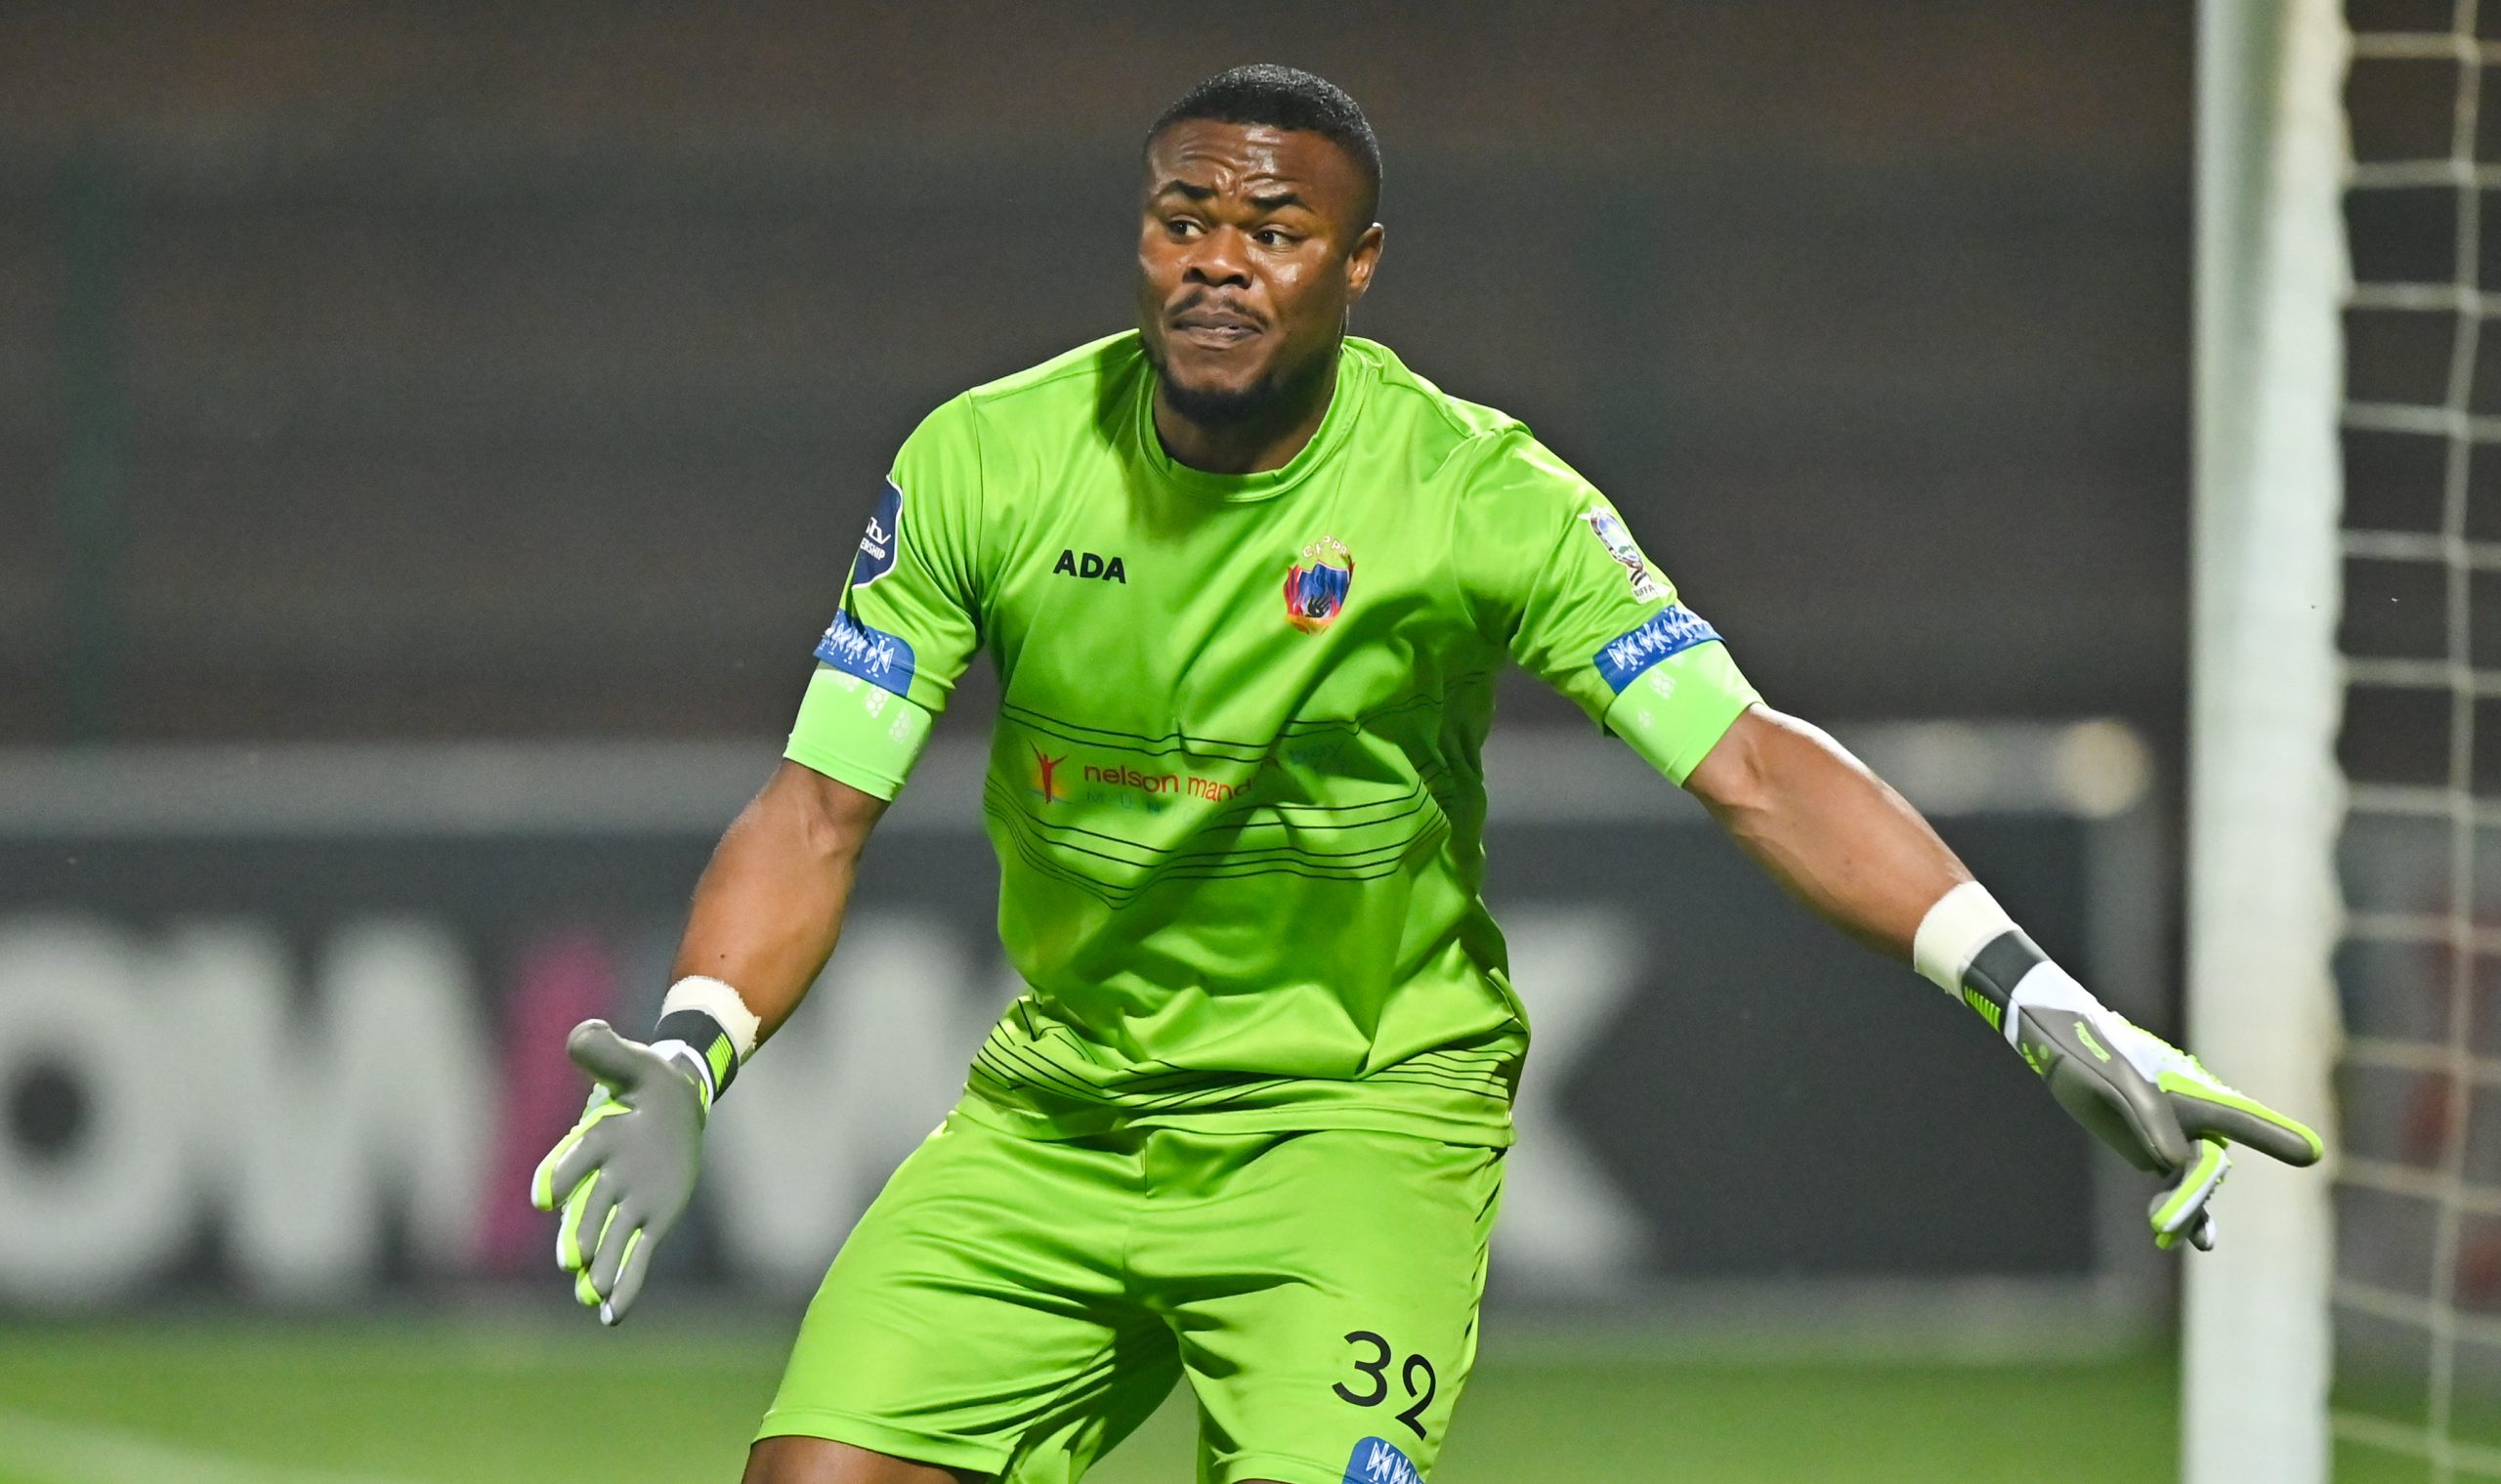 ‘He Needs Something Better’ — Chippa United Chief Confirms Nwabali Could Leave This Summer